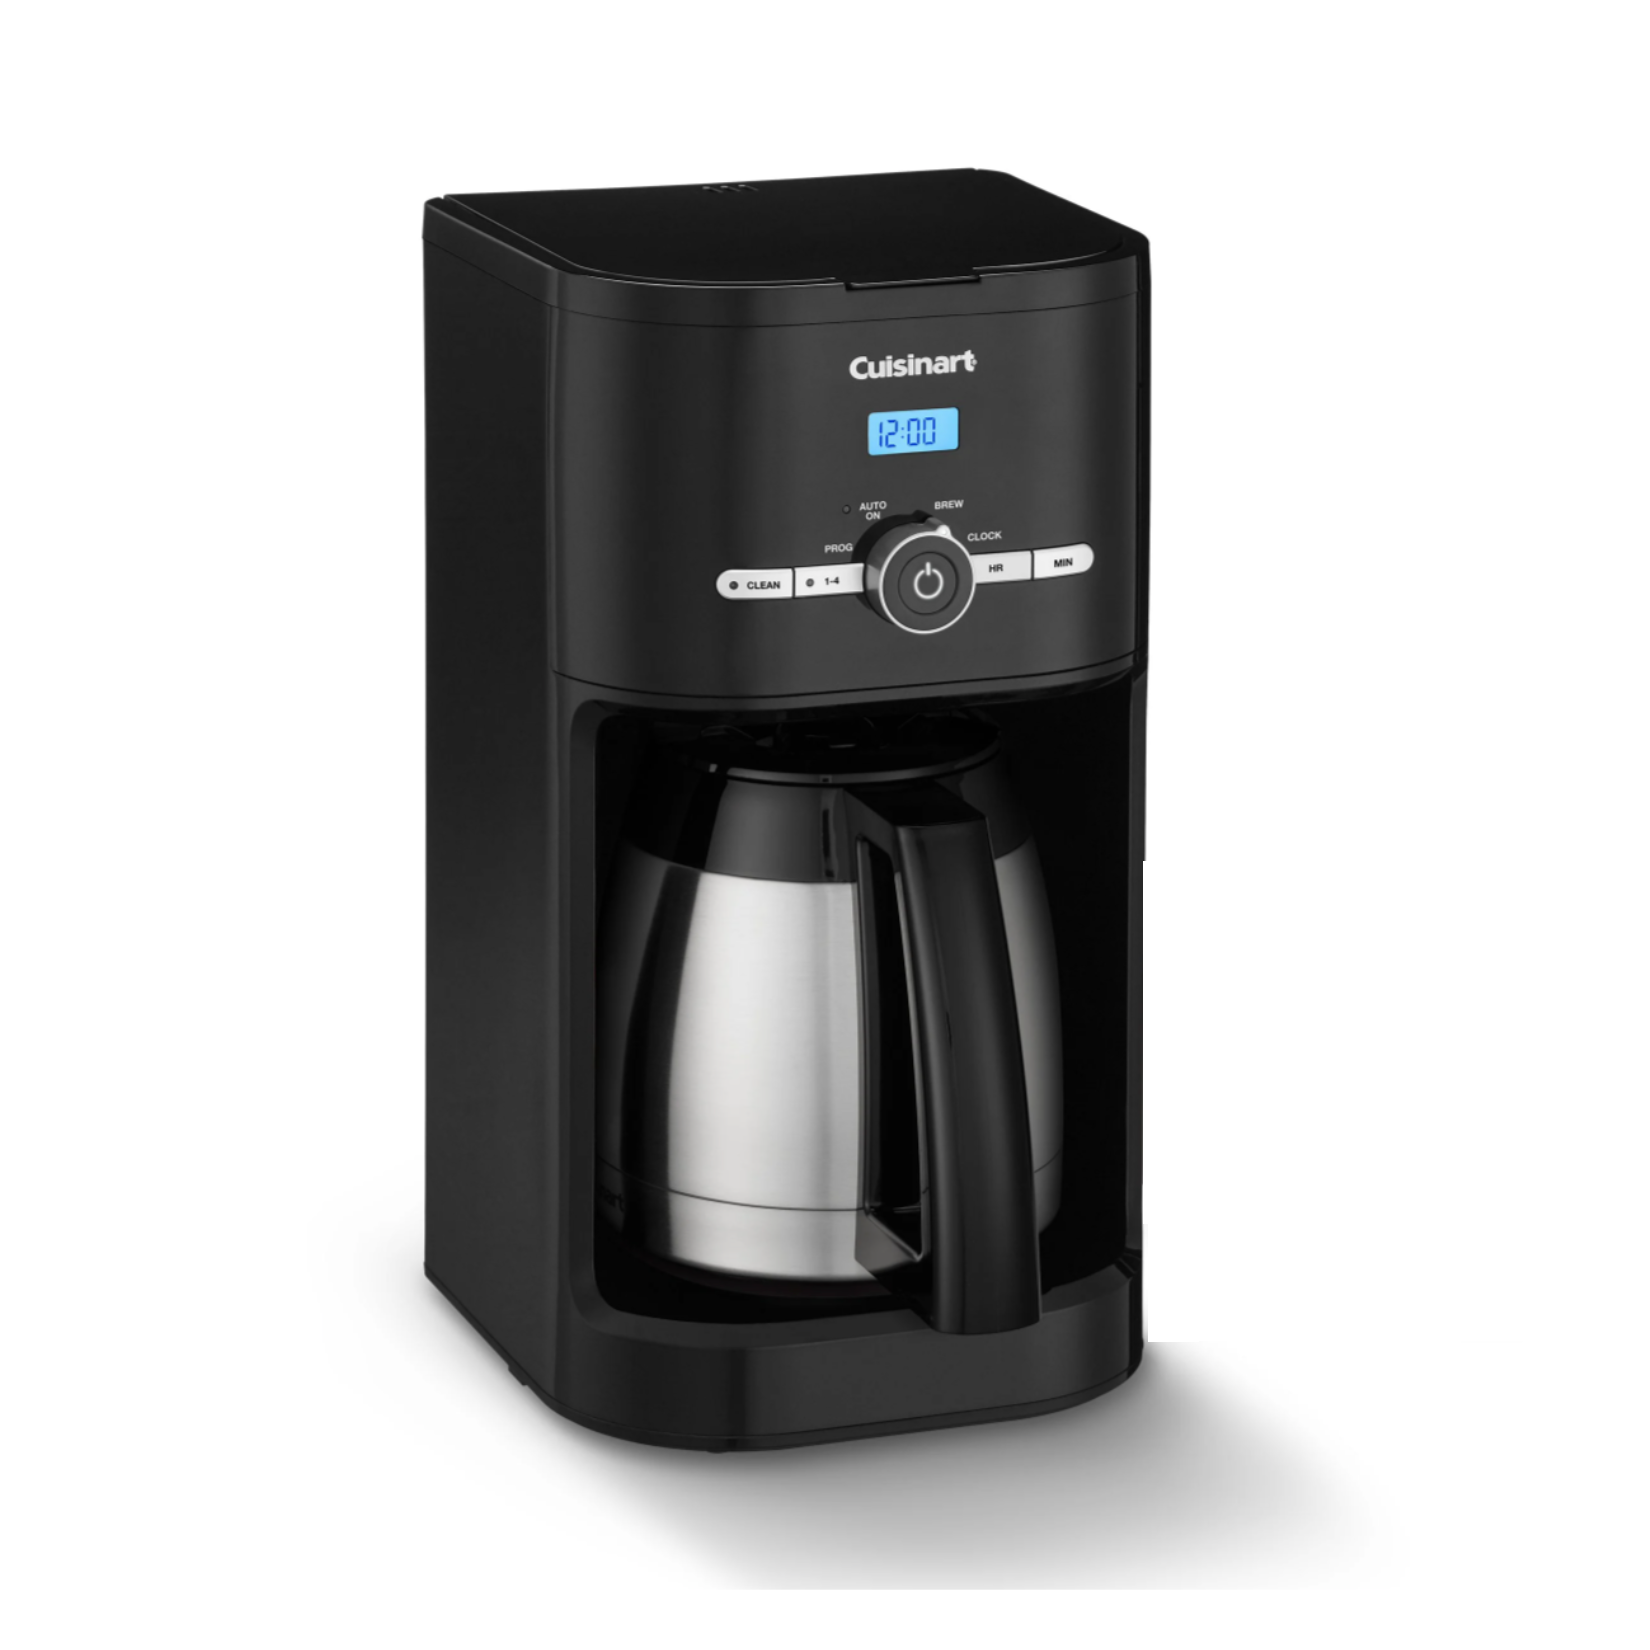 Cuisinart 10 Cup Programmable Thermal Coffeemaker – Black